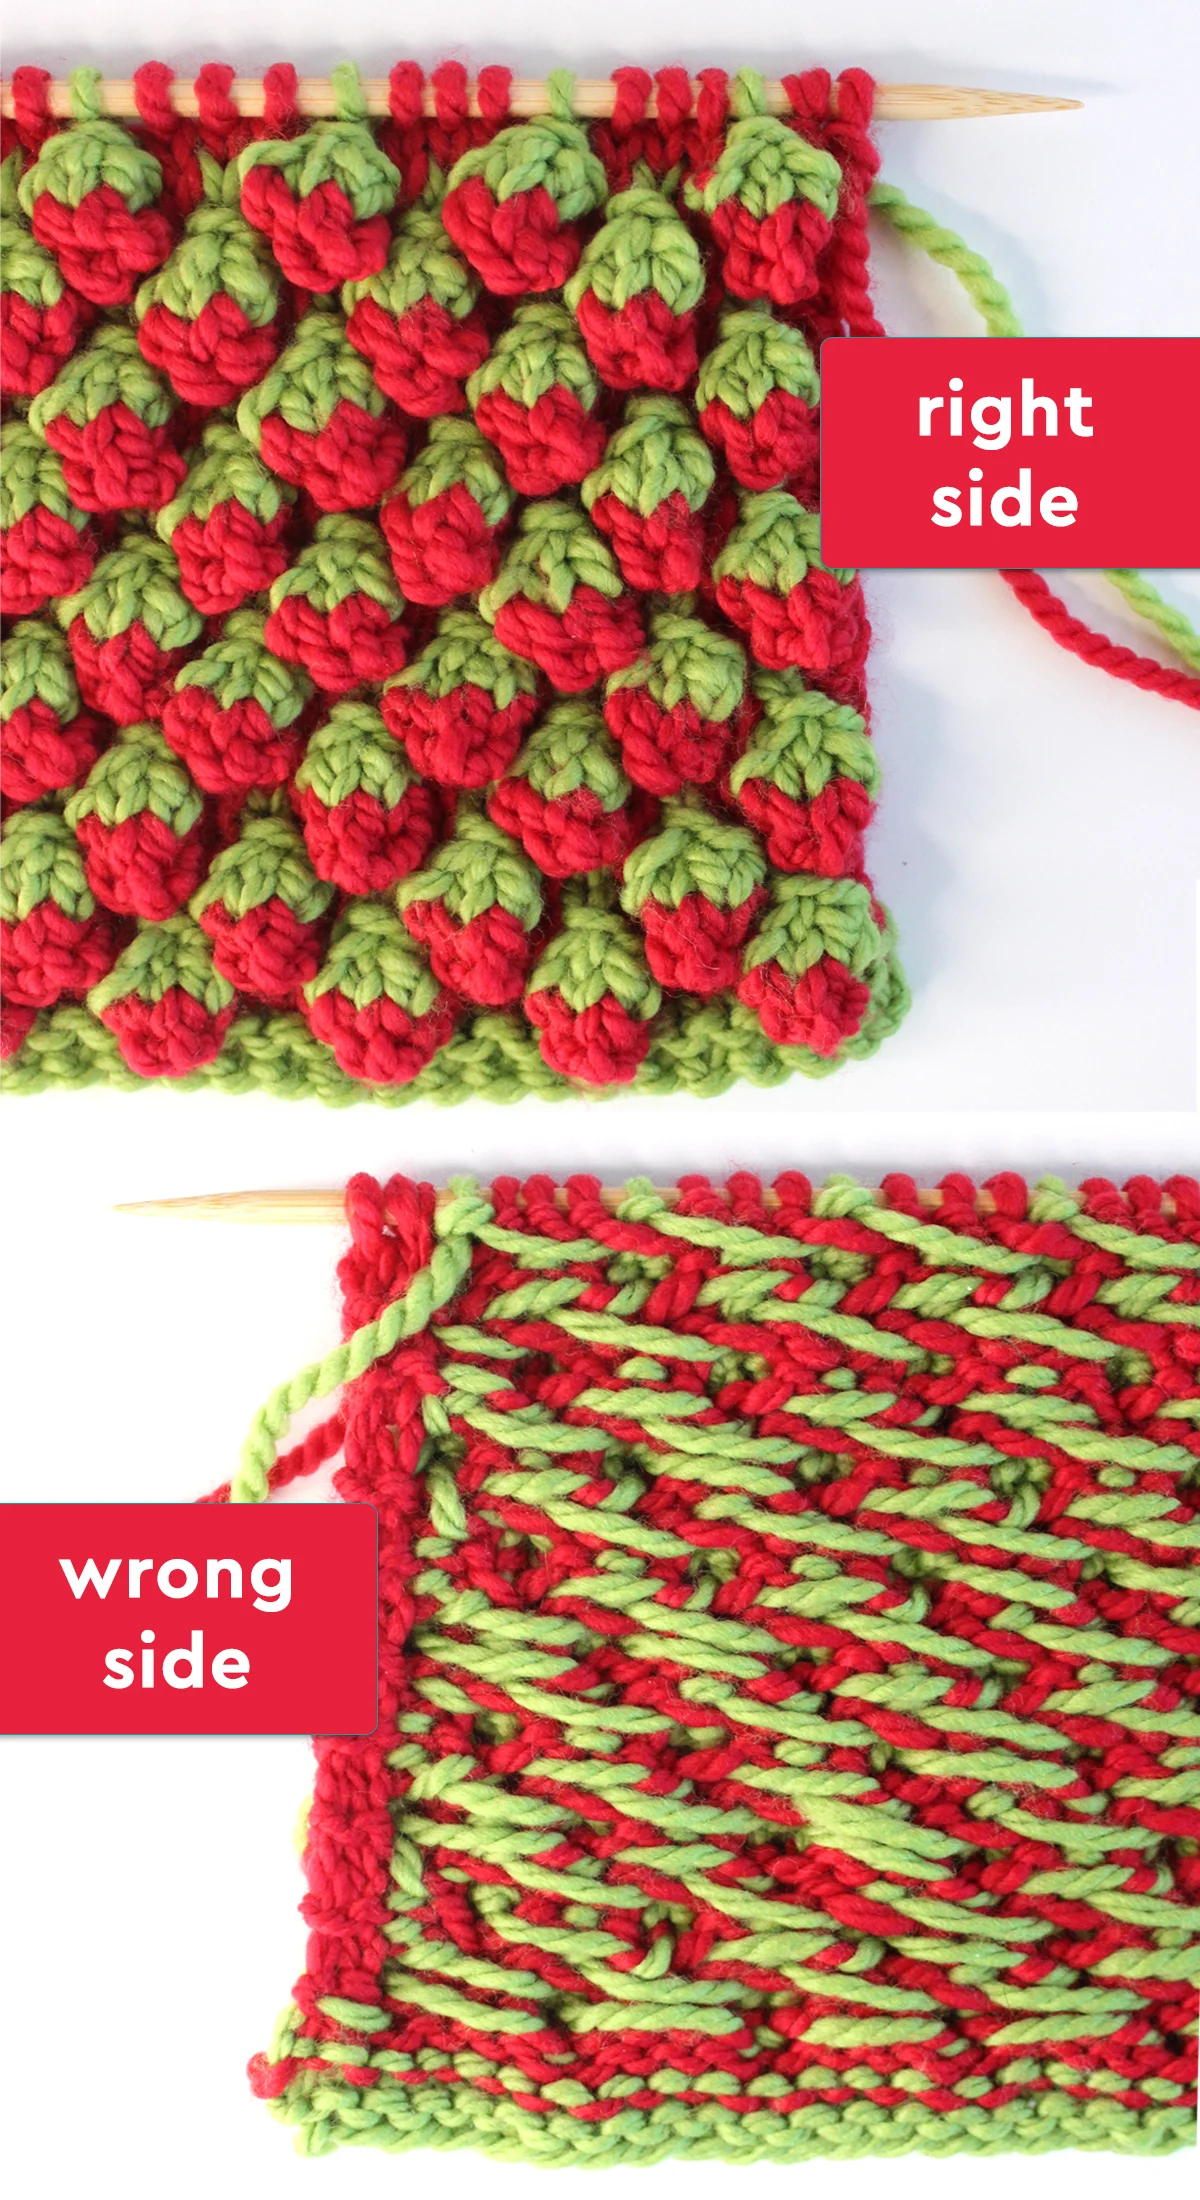 Right and wrong sides of the Strawberry knit stitch bobble pattern in red and green colored yarn.